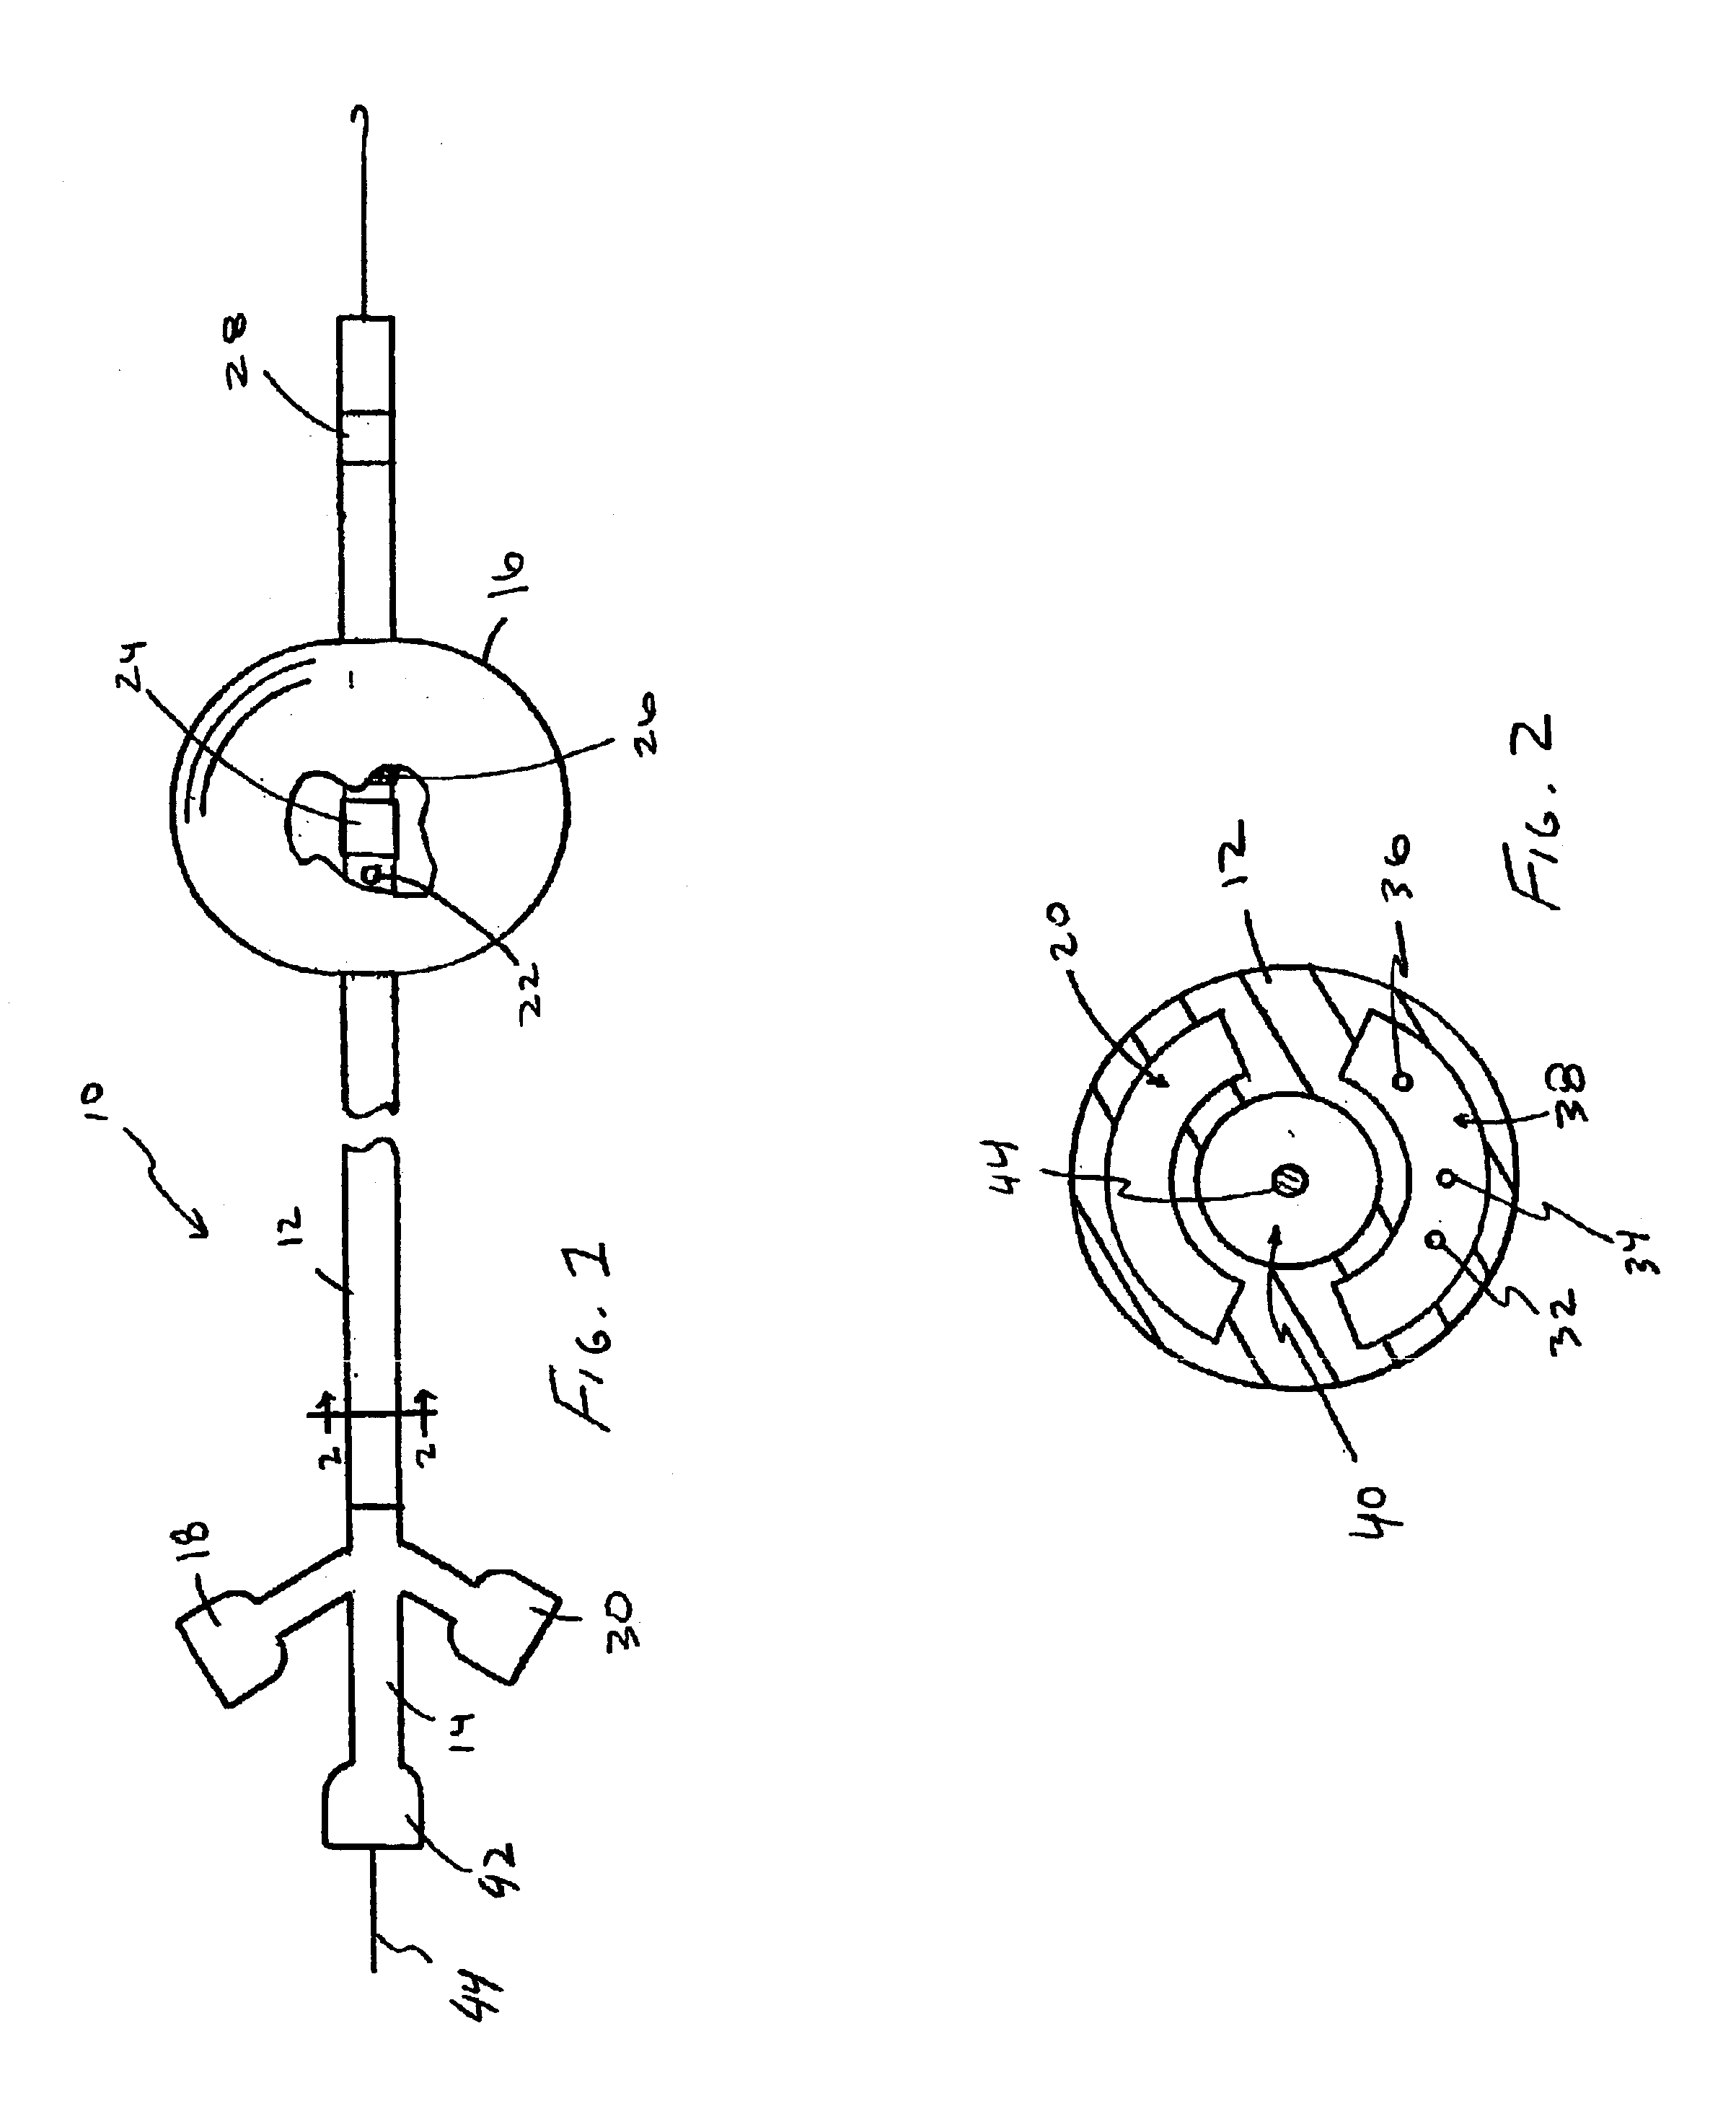 Apparatus for mapping and coagulating soft tissue in or around body orifices